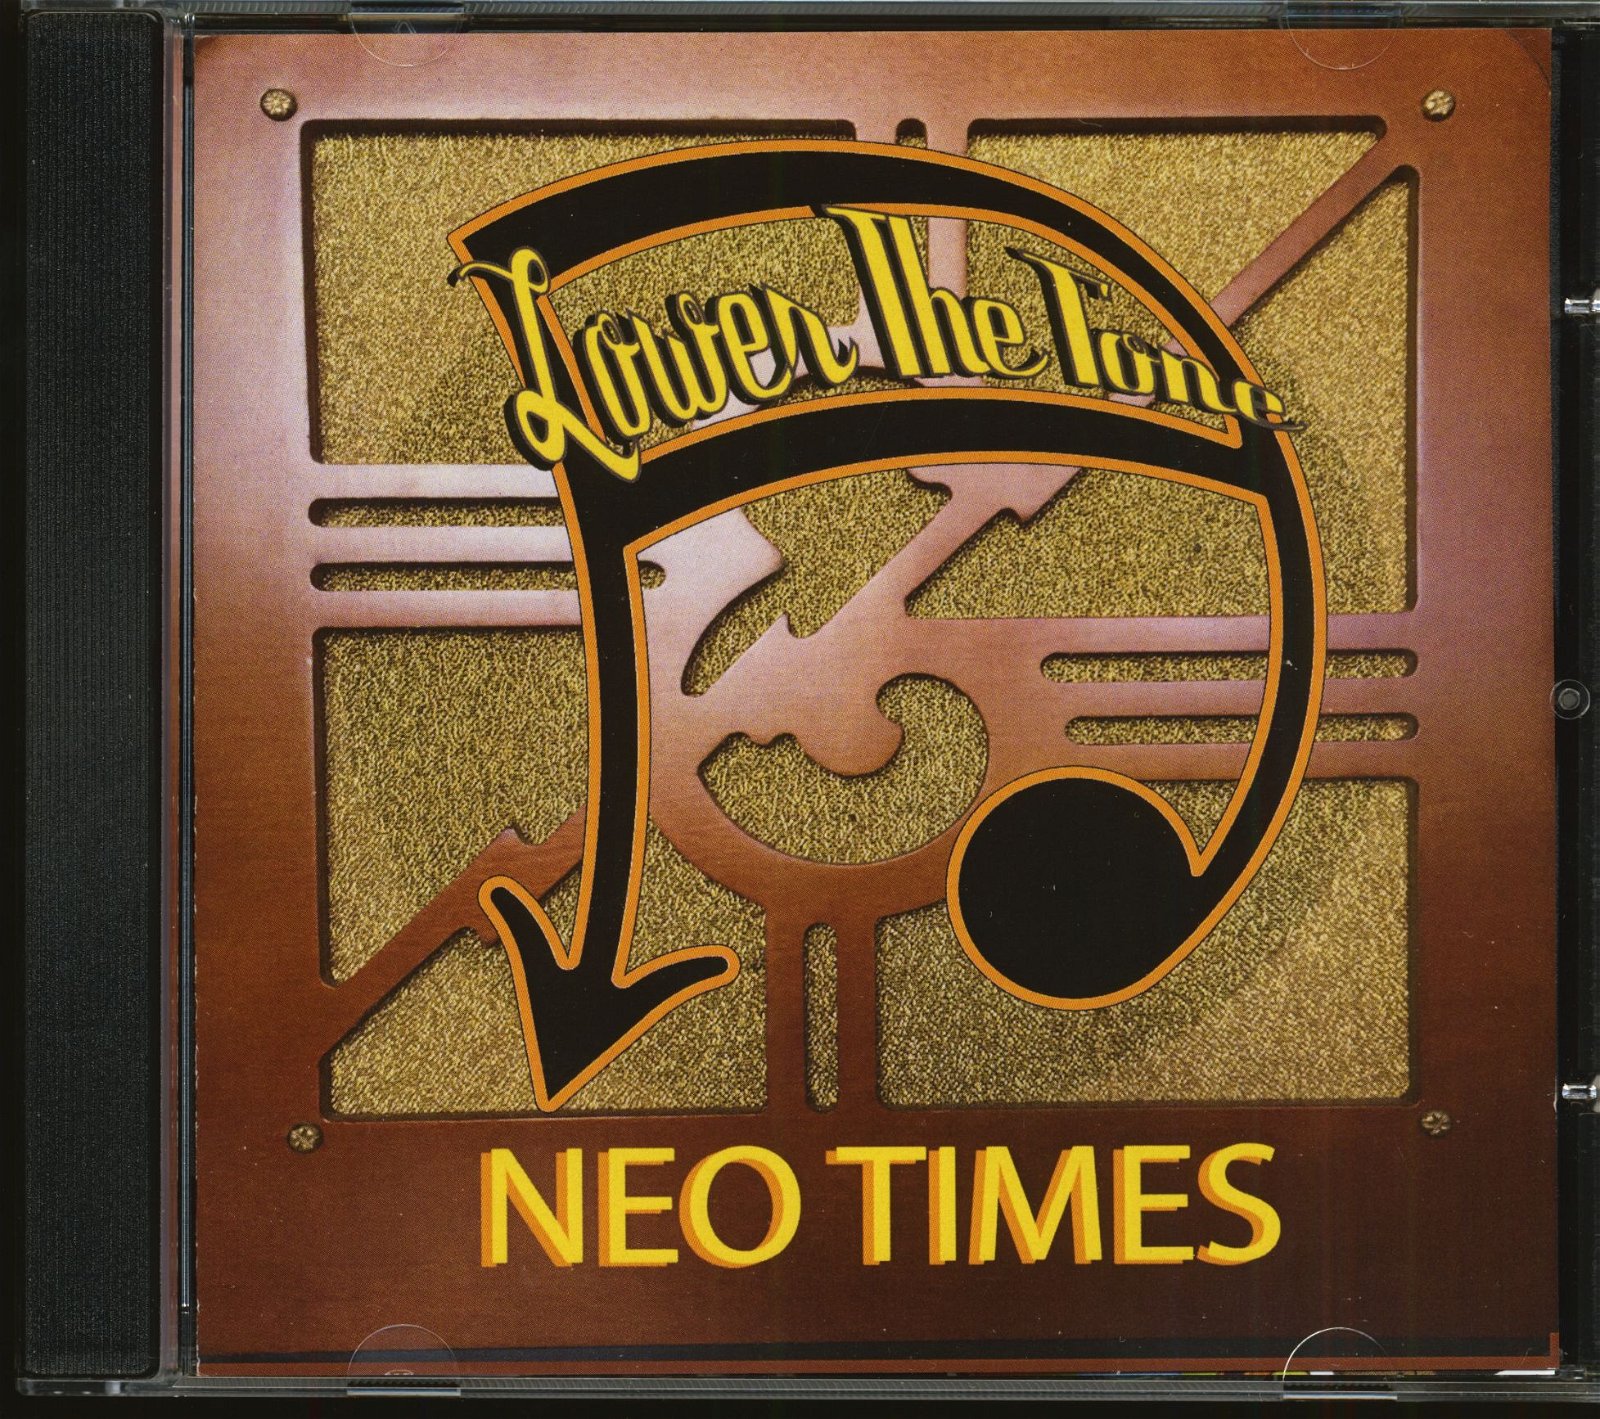 CD Shop - LOWER THE TONE NEO TIMES